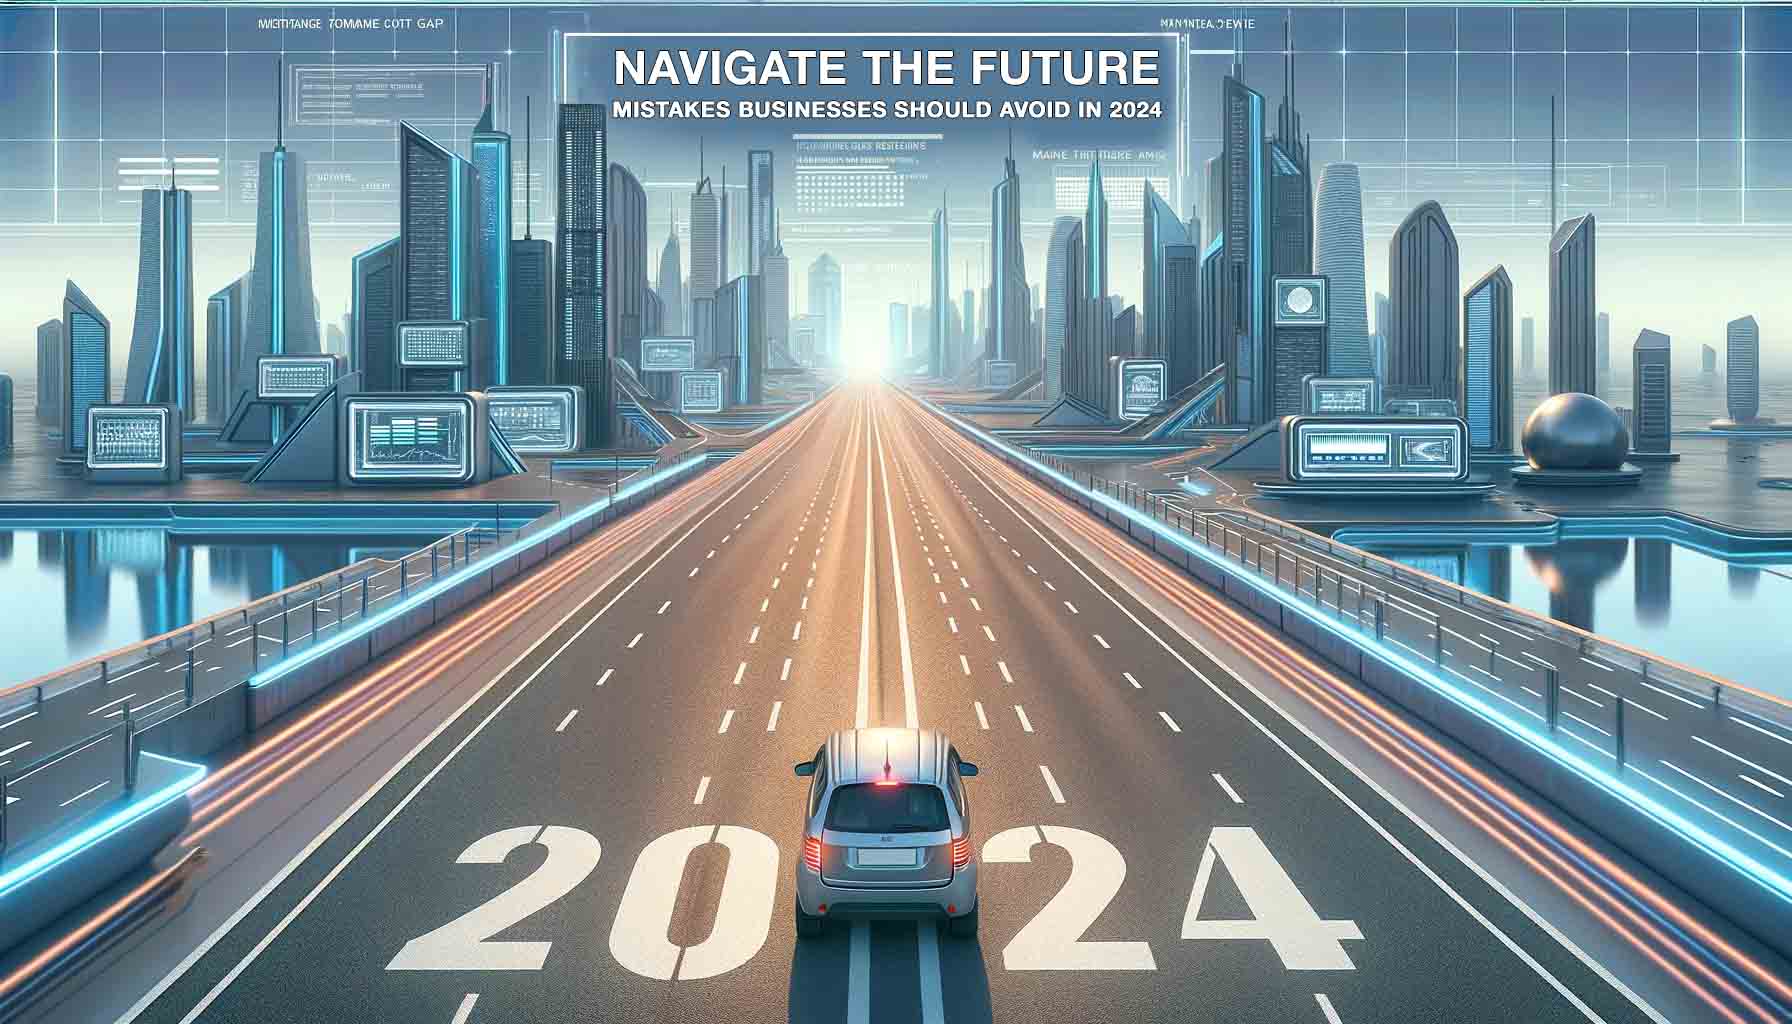 Navigate the Future: Mistakes MSMEs Should Avoid in 2024